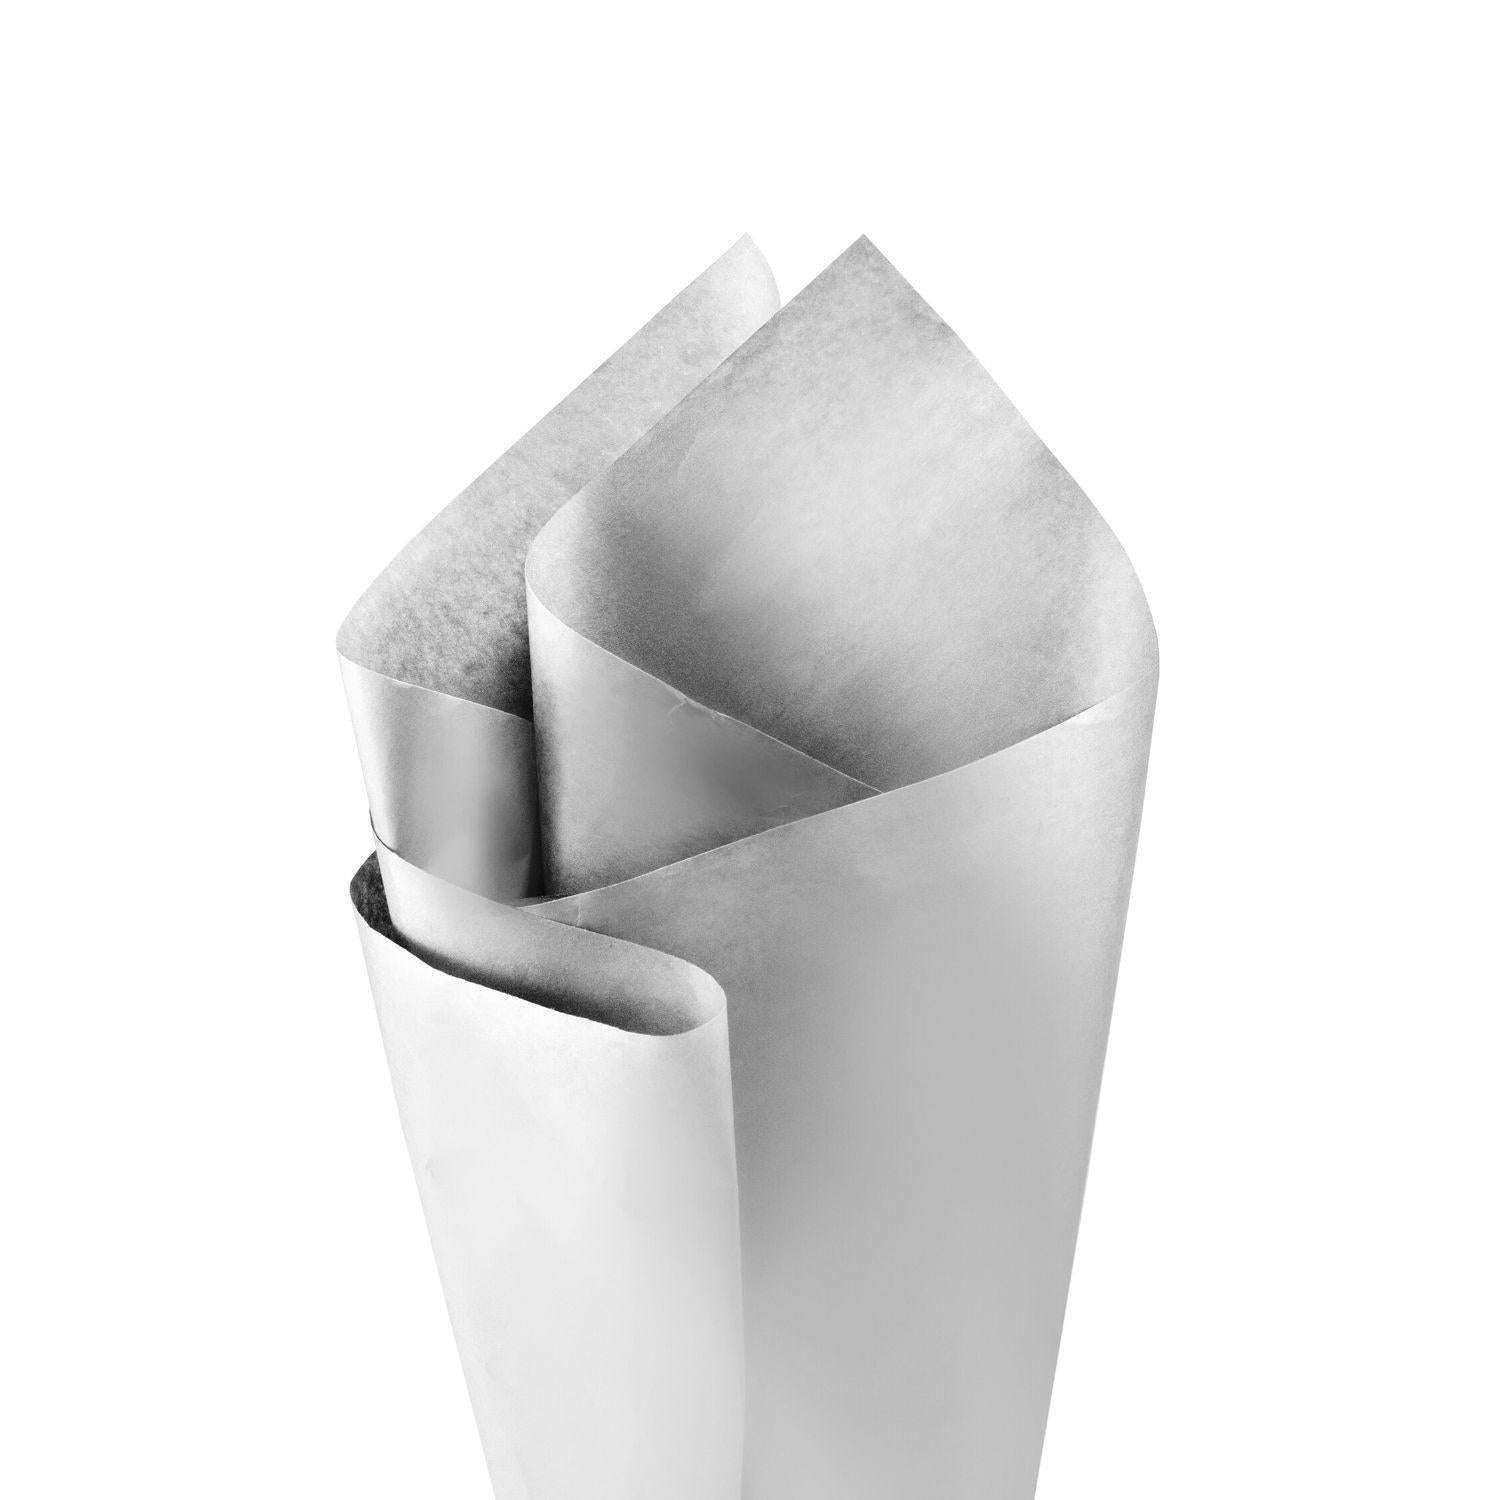 White Tissue Paper for Gift Bags, 225 Sheets of 20 x 20 Inches Bulk Tissue  Paper for Packaging- Includes 225 Sheets Premium White Tissue Paper Bulk